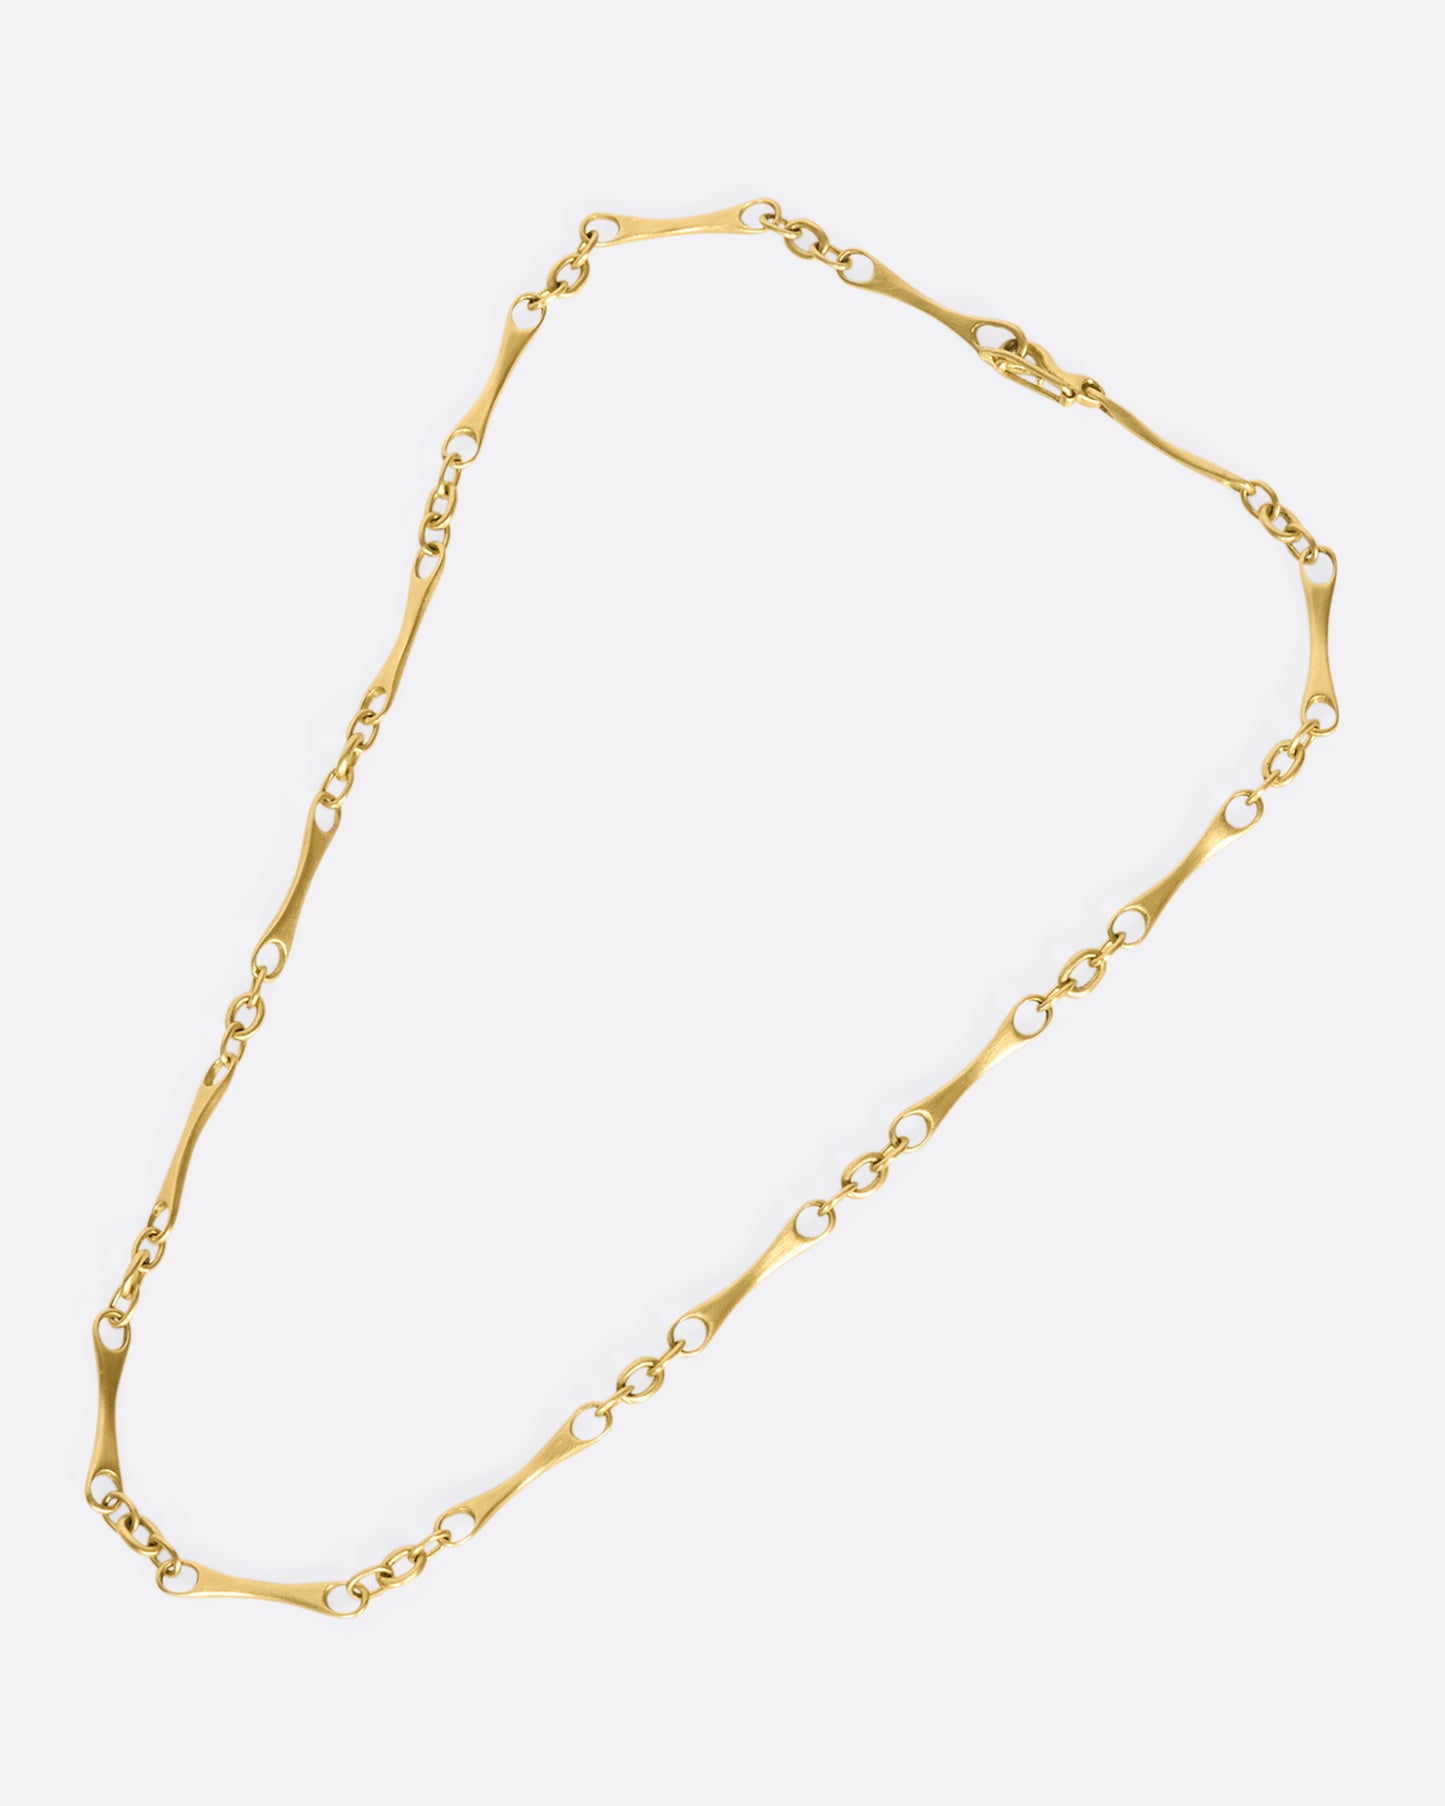 A gold necklace with elongated links with circular cut outs on each end. laying down flat.